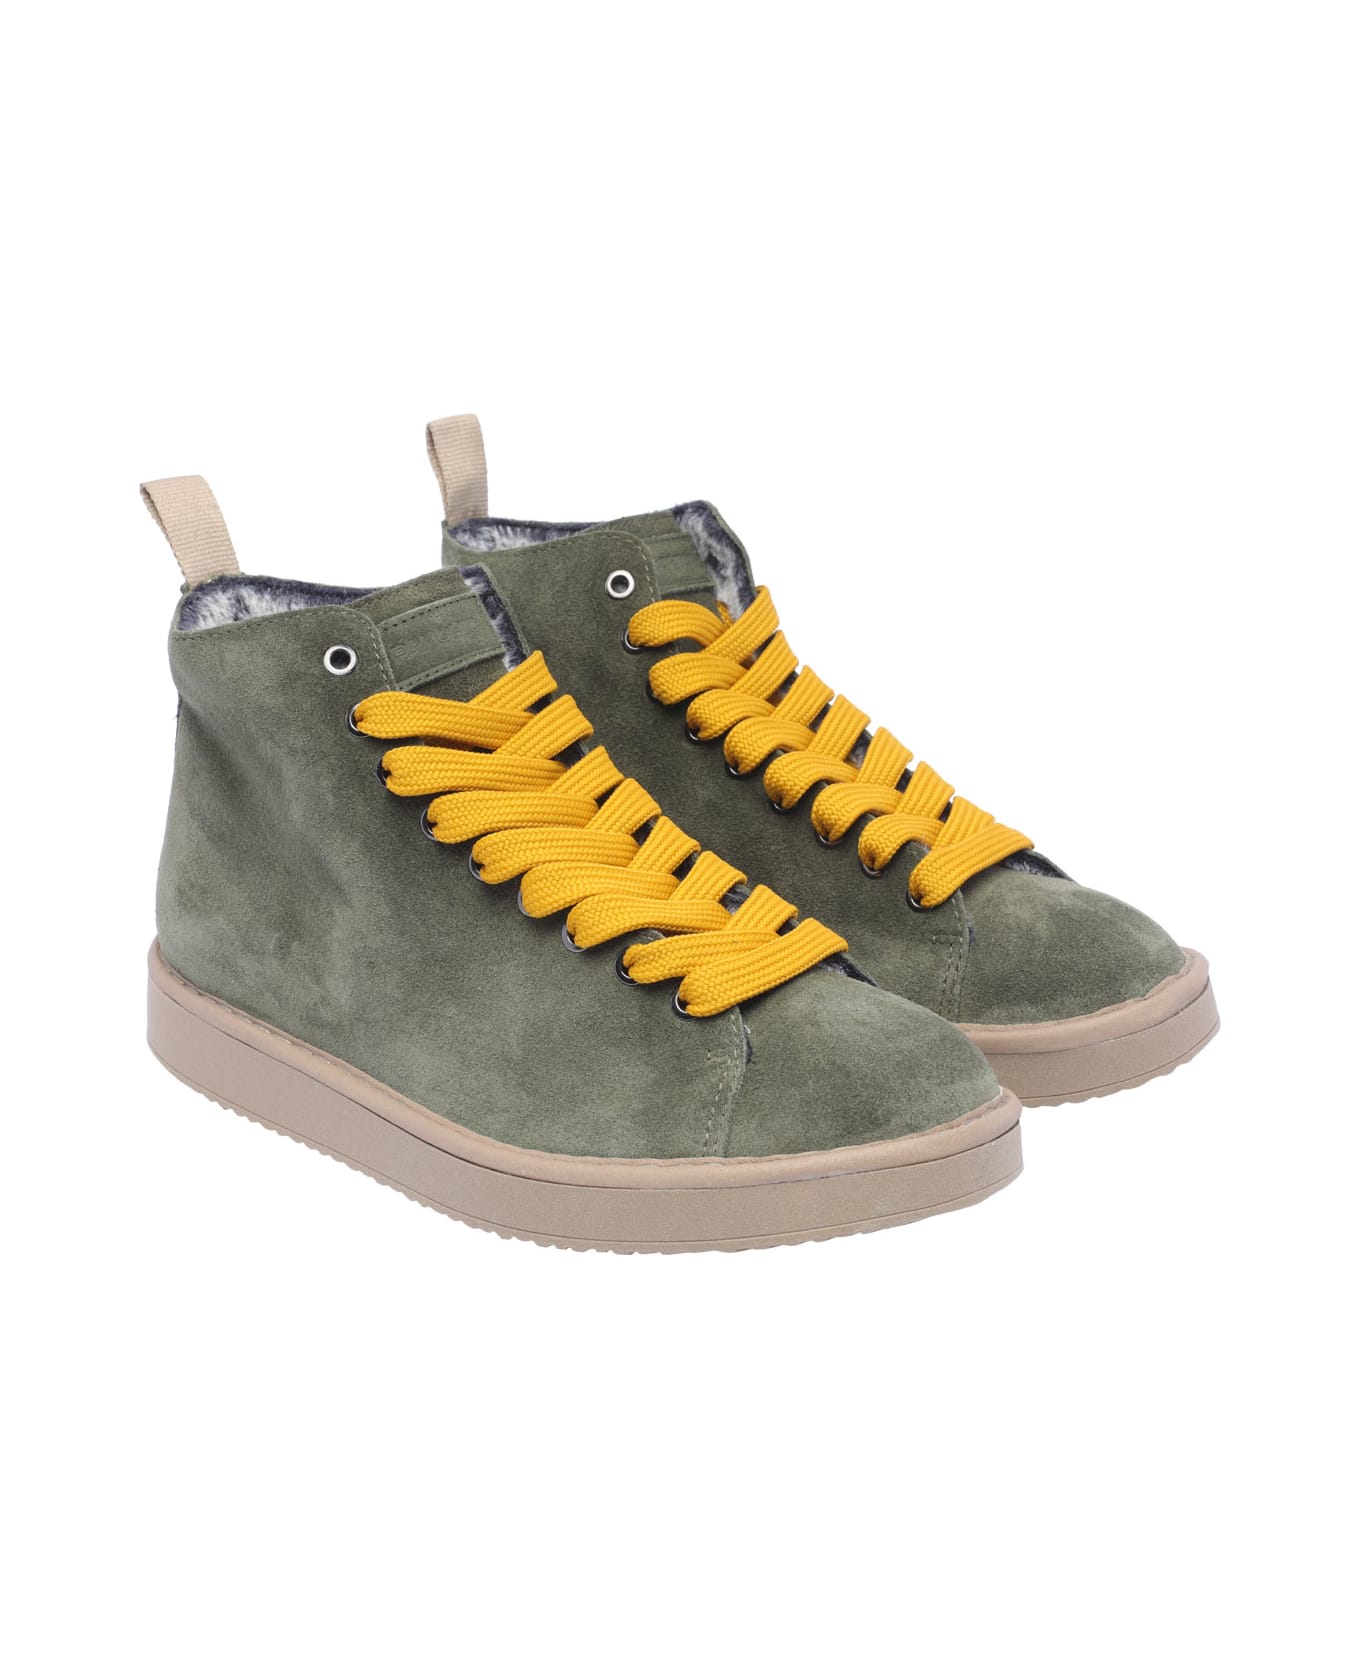 Panchic P01 Sneakers - Military Green Yellow スニーカー